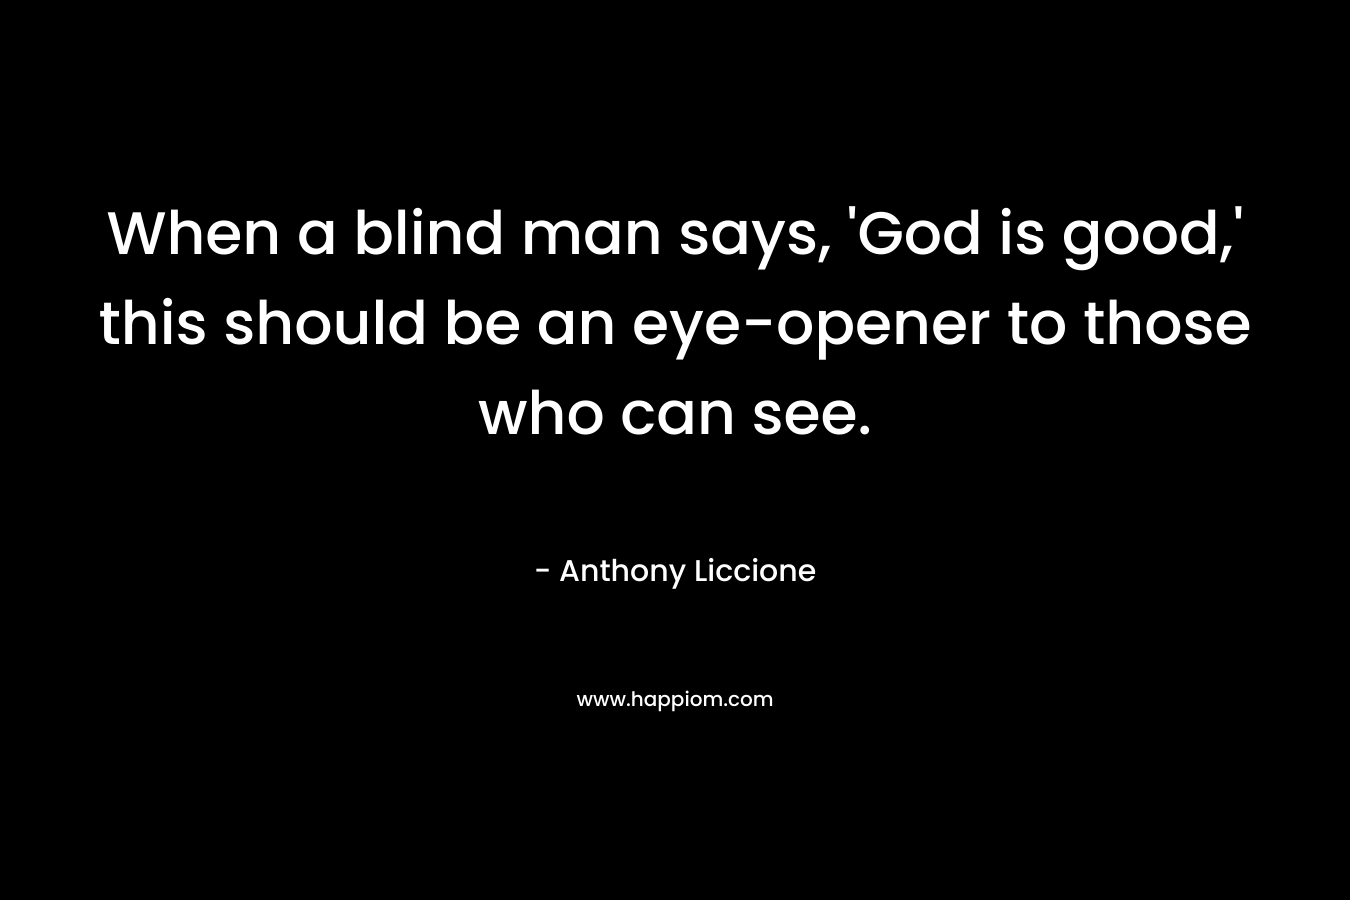 When a blind man says, 'God is good,' this should be an eye-opener to those who can see.